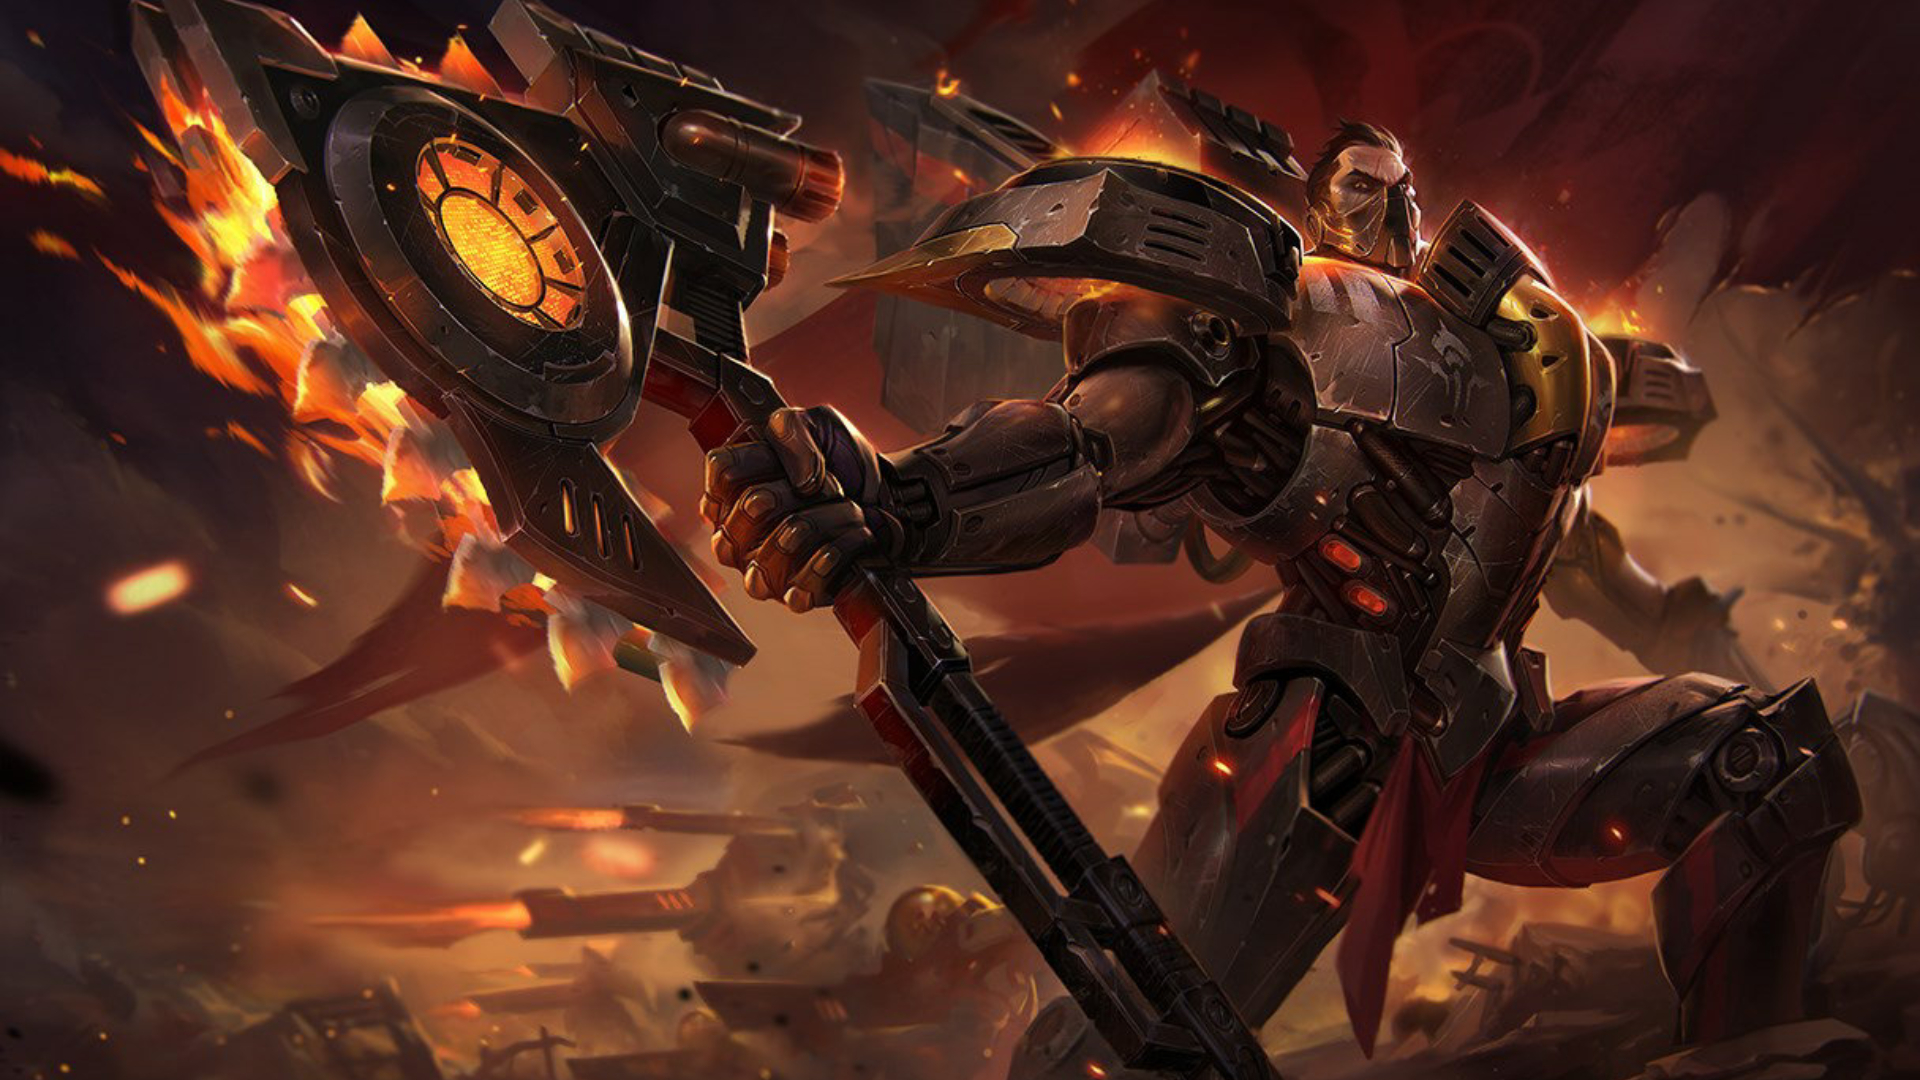 Darius Build Guides :: League of Legends Strategy Builds, Runes and Items